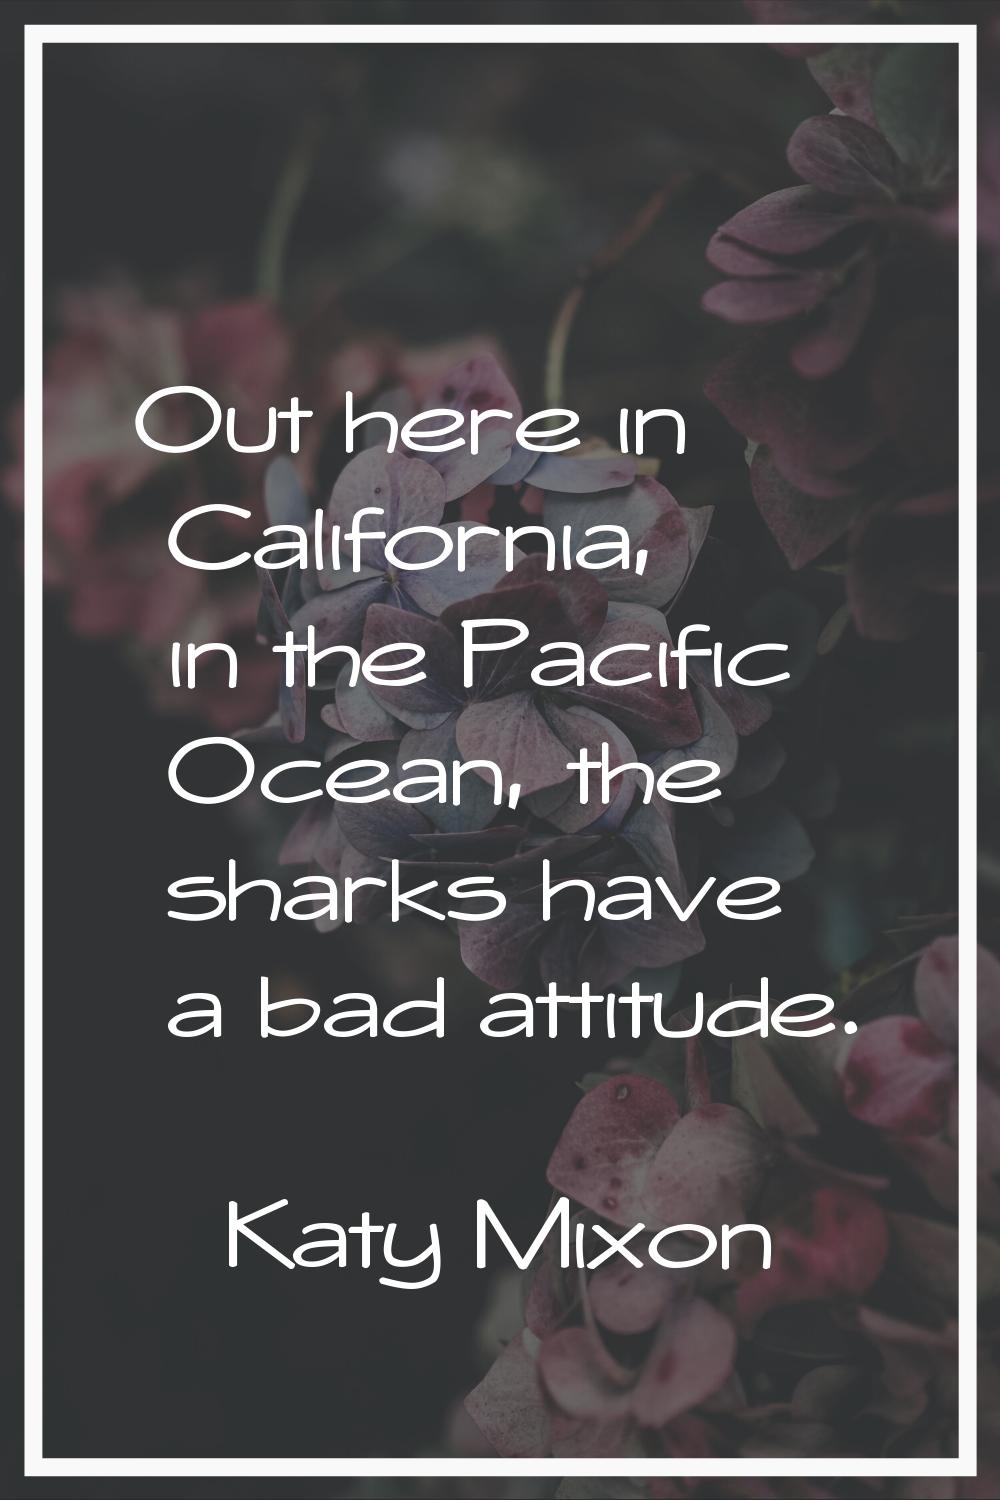 Out here in California, in the Pacific Ocean, the sharks have a bad attitude.